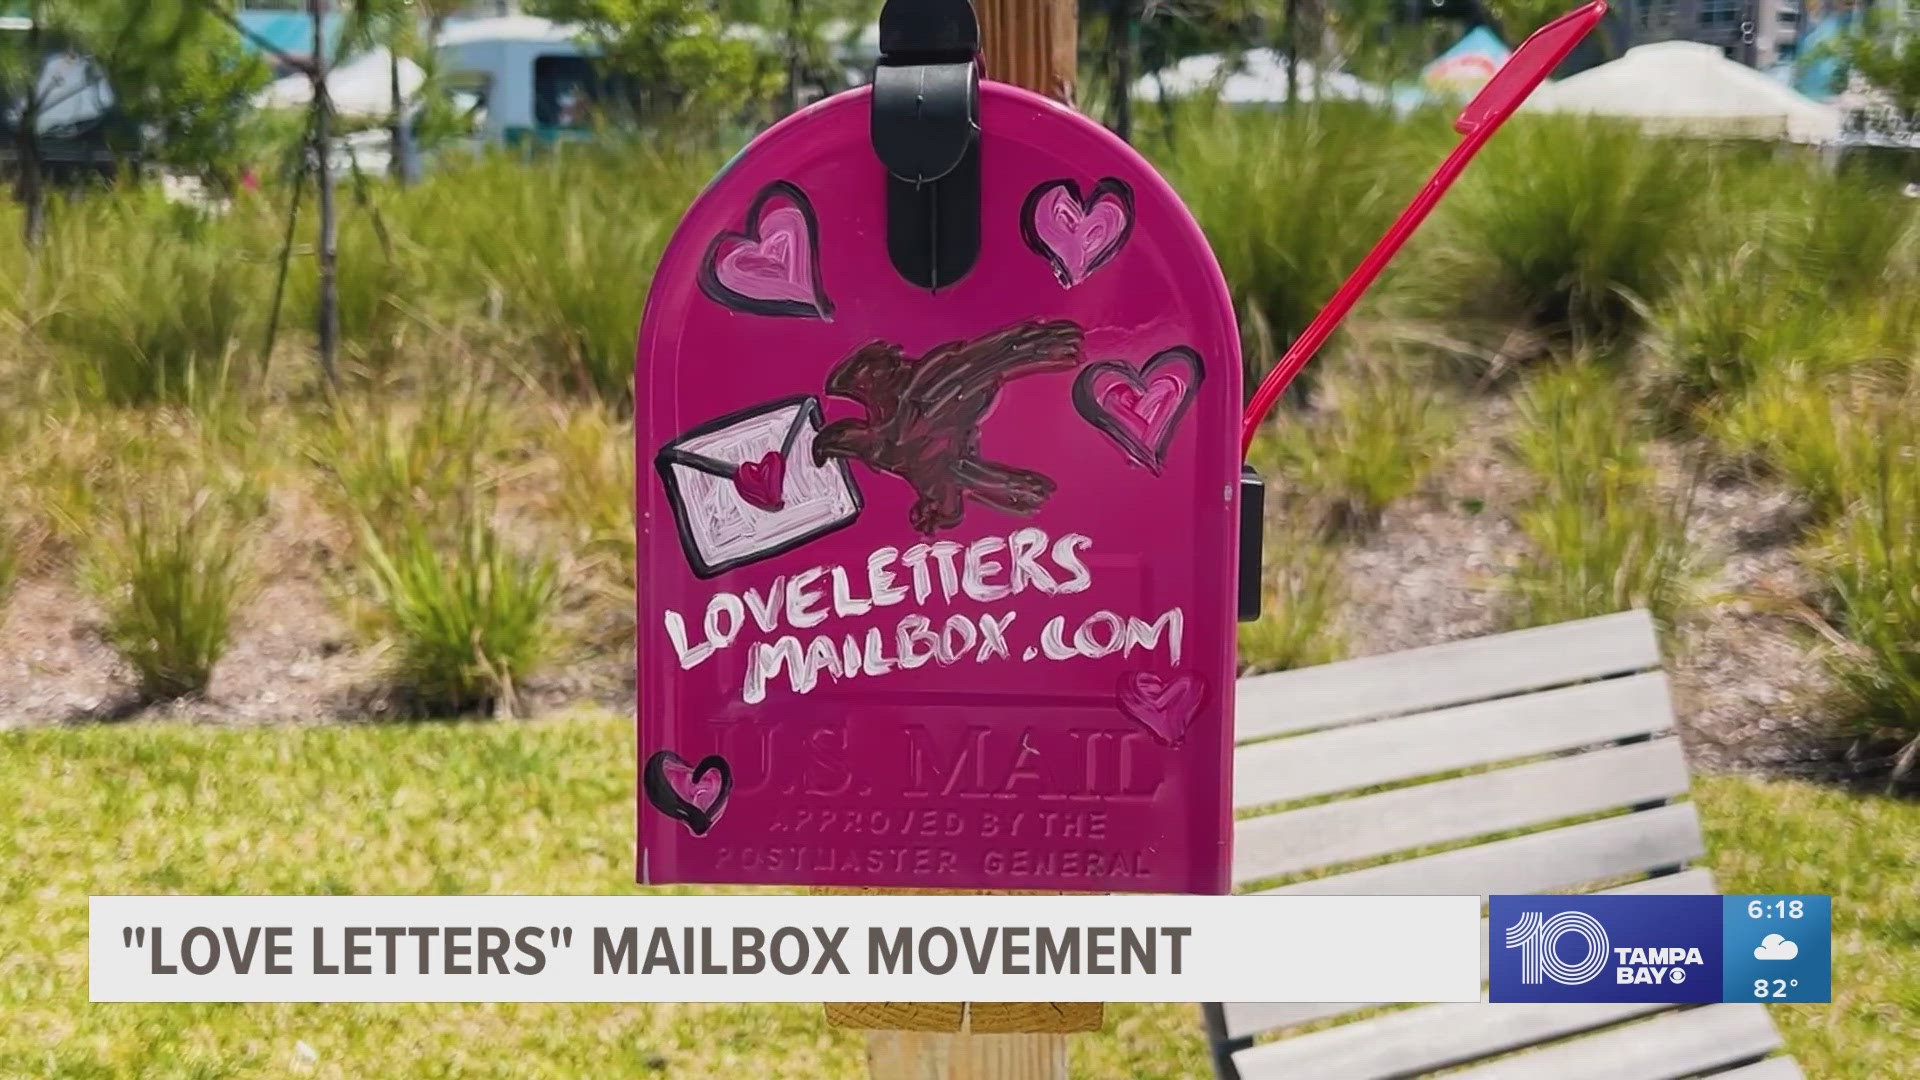 Daynie Rain began a handwritten love letter project right from her van. Mailboxes can be found all over Florida where you can write or read works of encouragement.